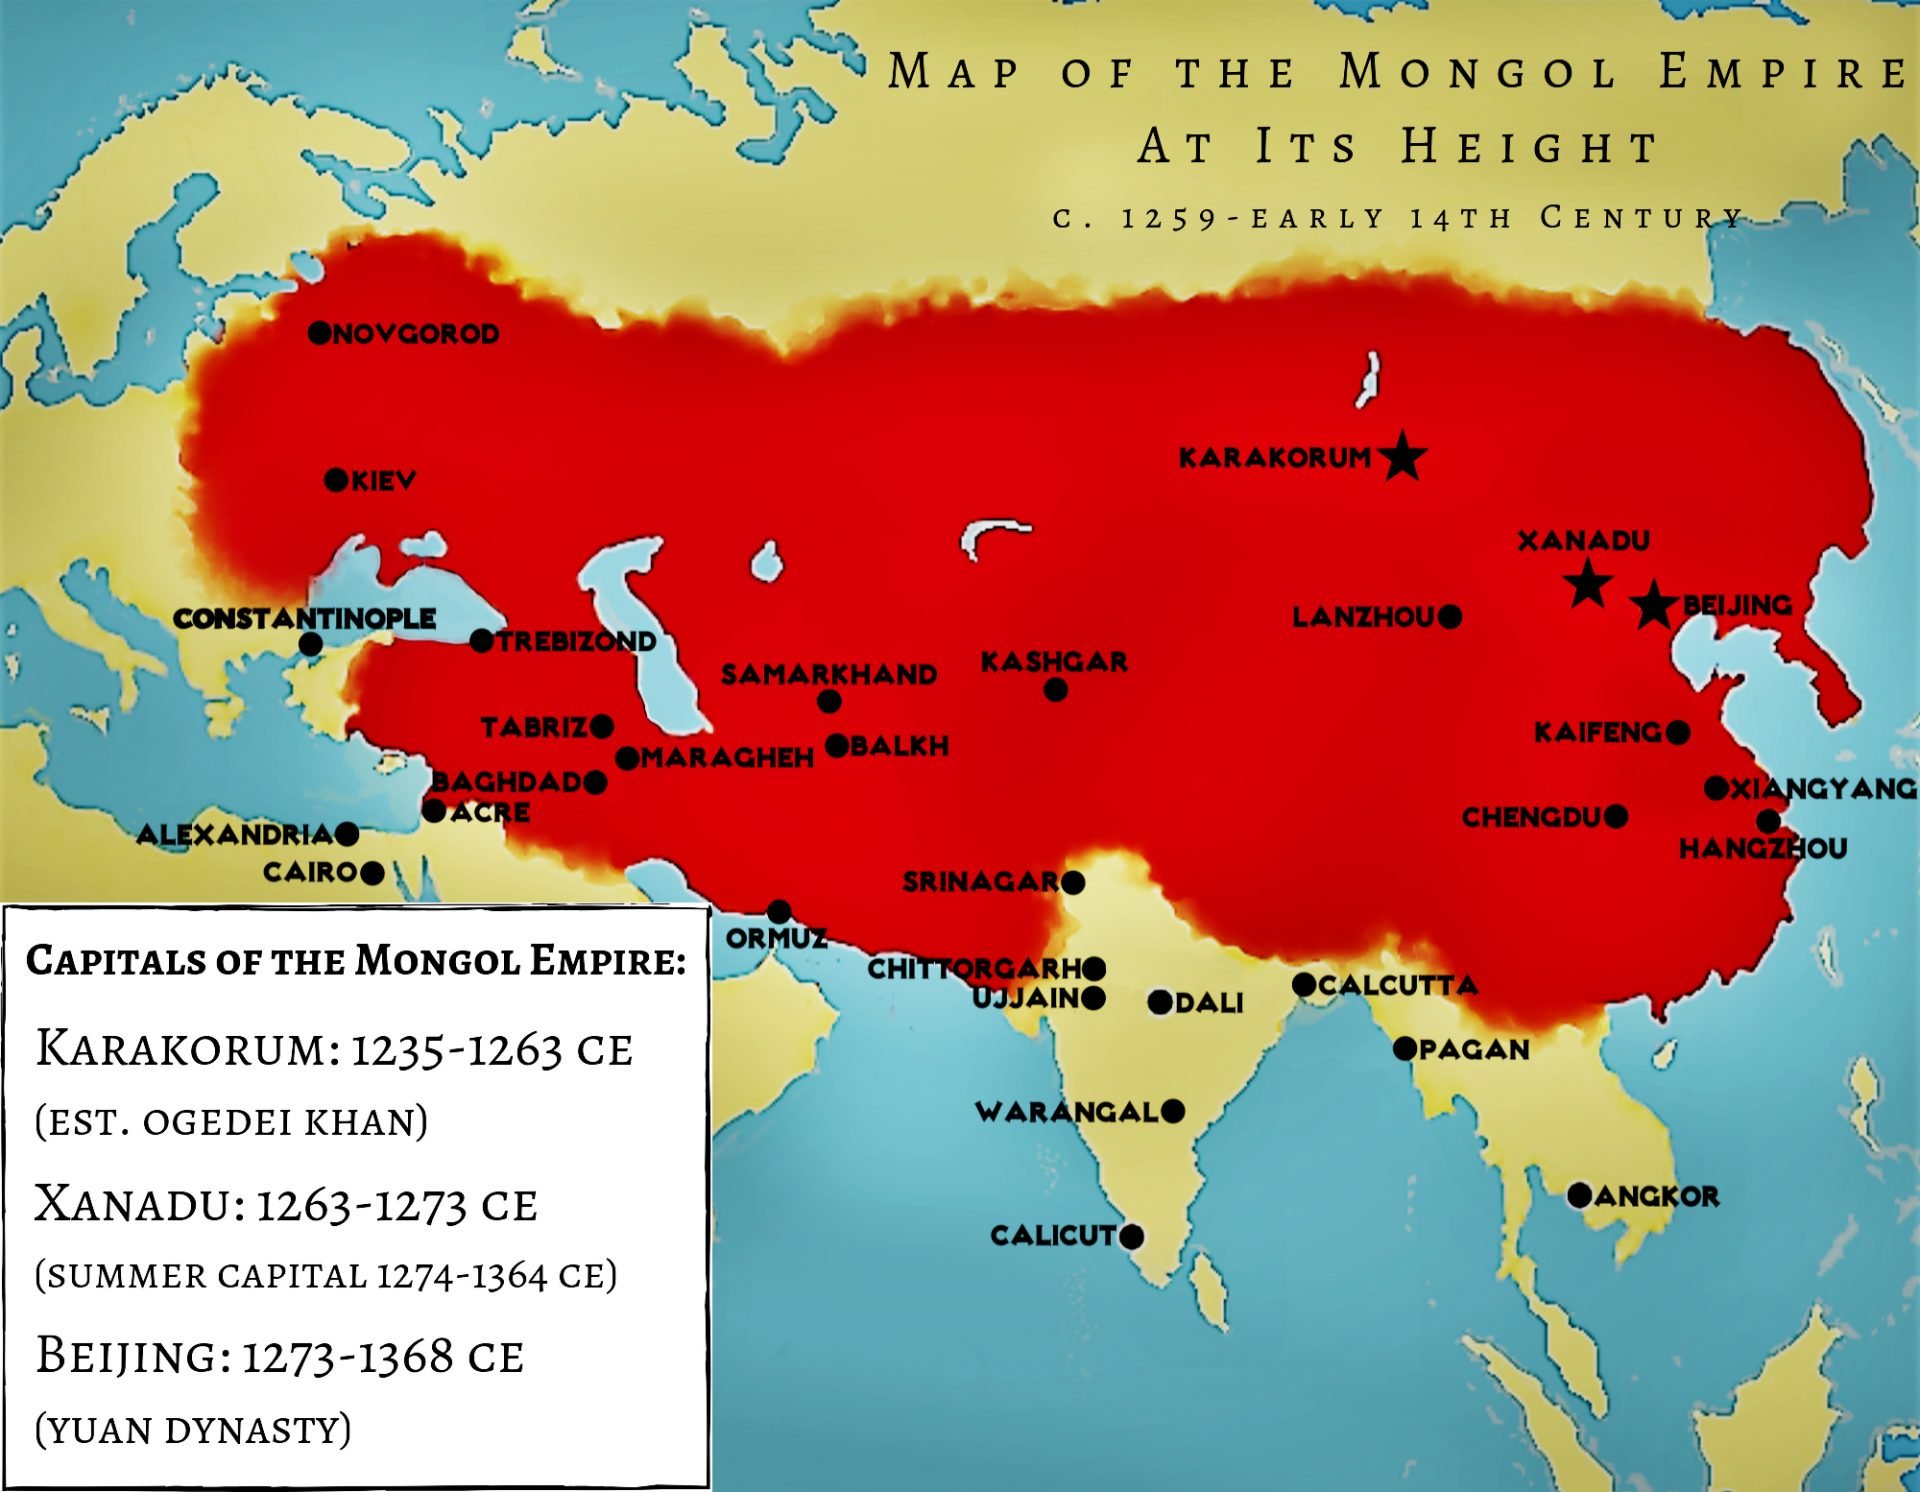 A map of the Mongol Empire at its Height, 1259–early 14th century, in red and yellow, showing its capitals and major regions in the early 14th century.